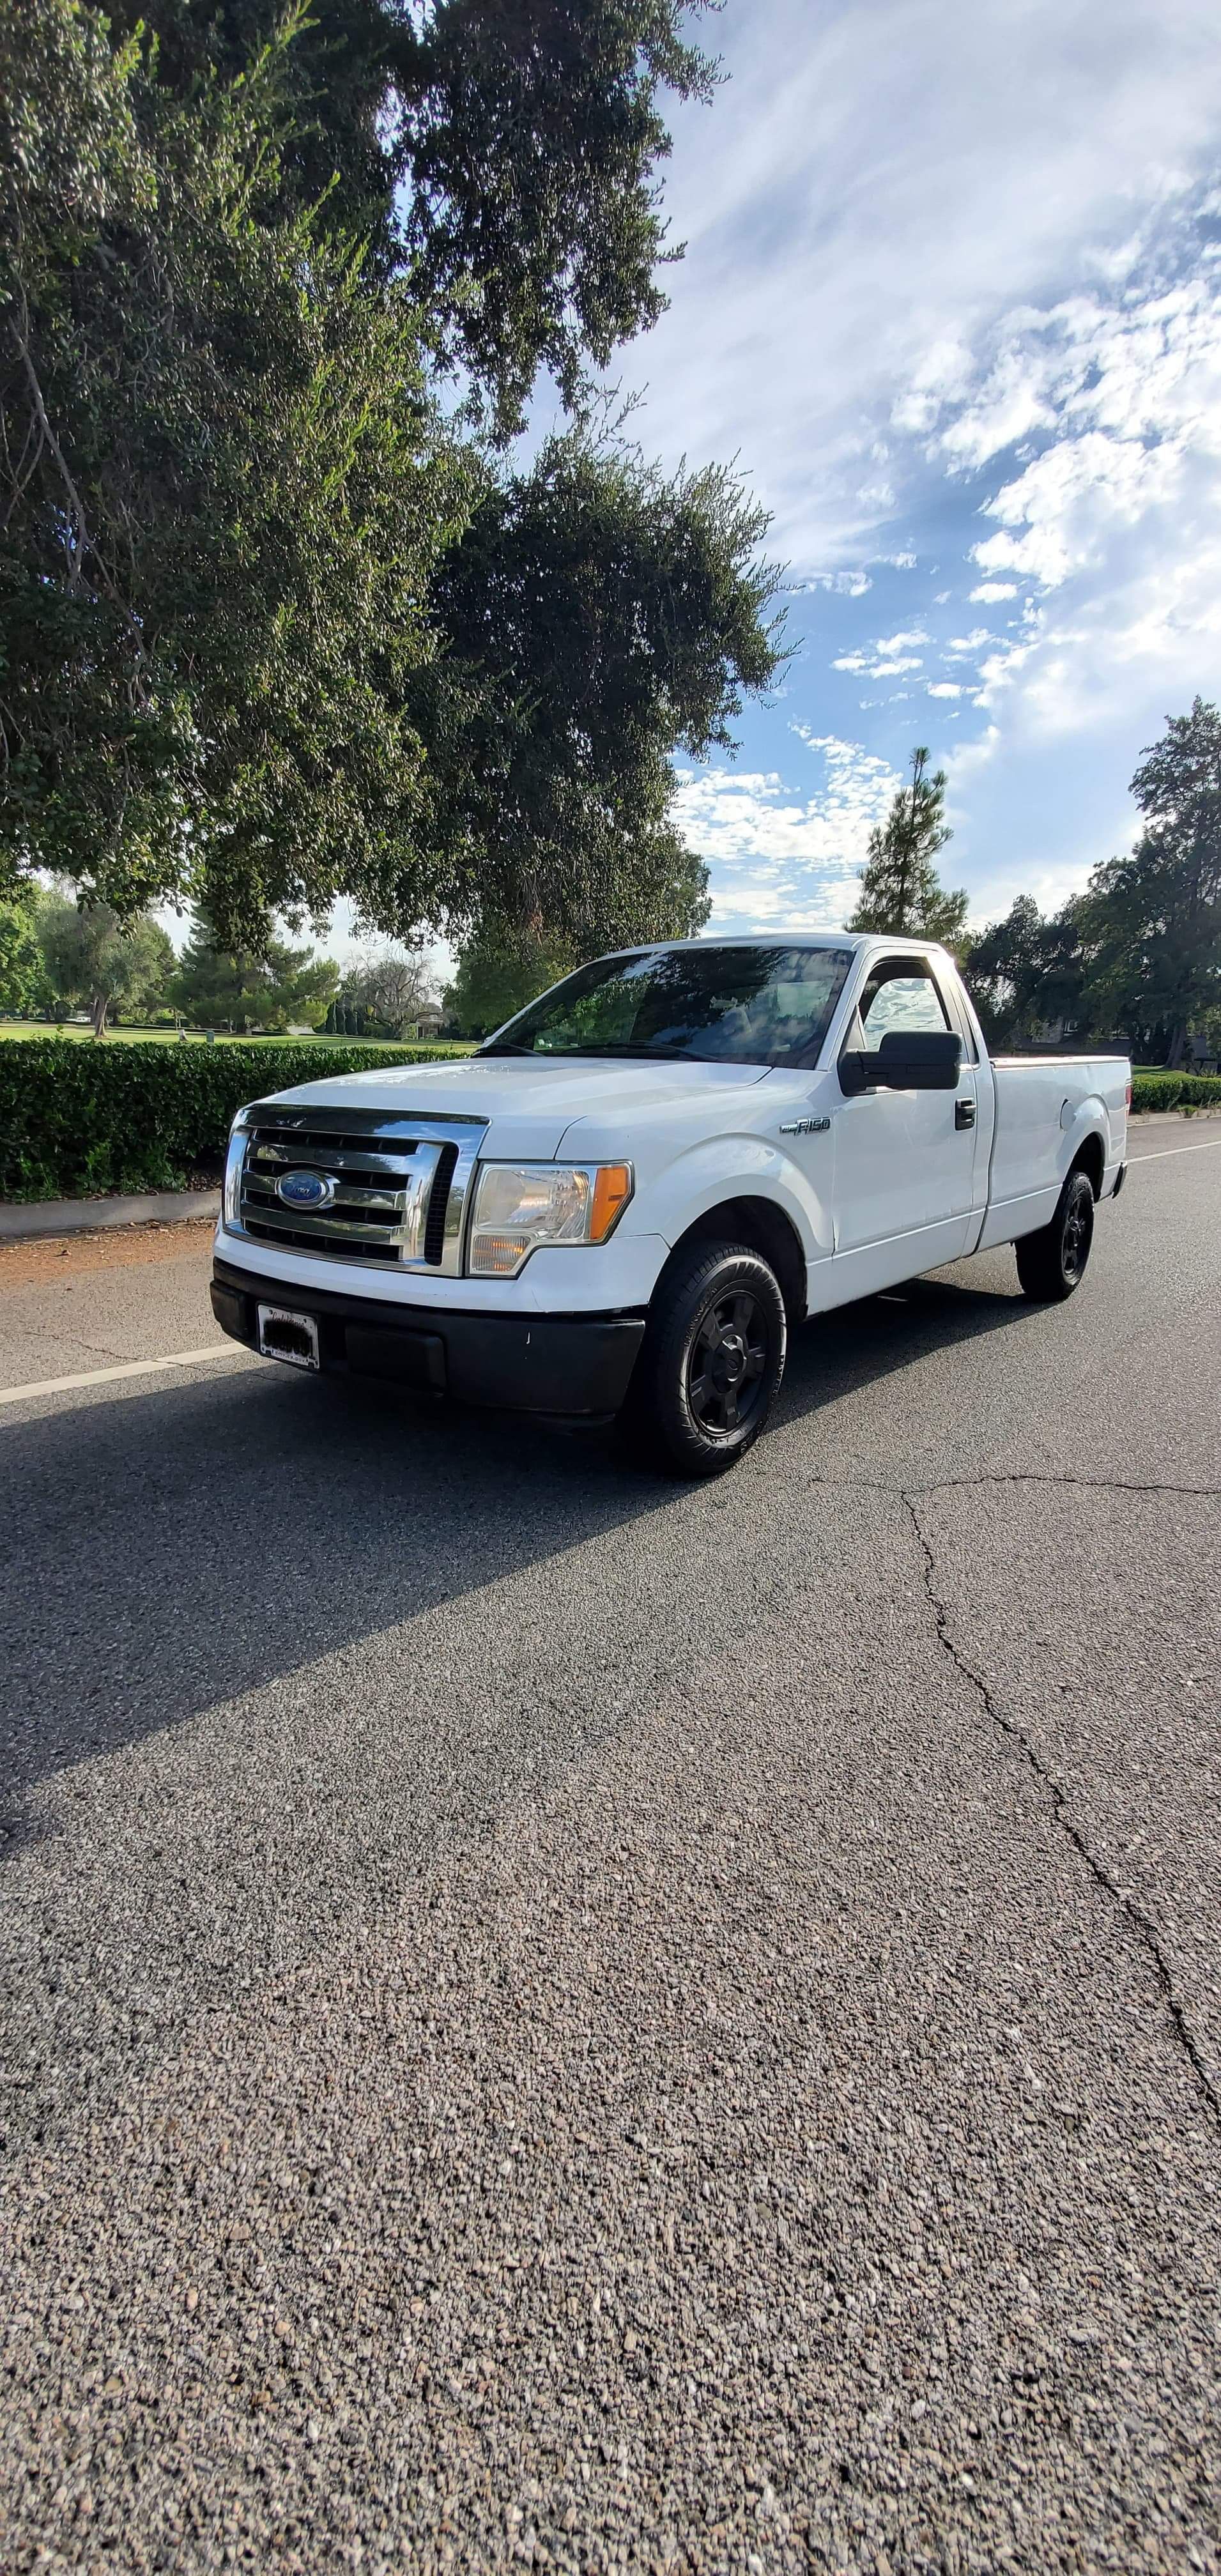 2009 Ford F150, CLEAN TITLE, ac works 🥶, current tags, smog check ready